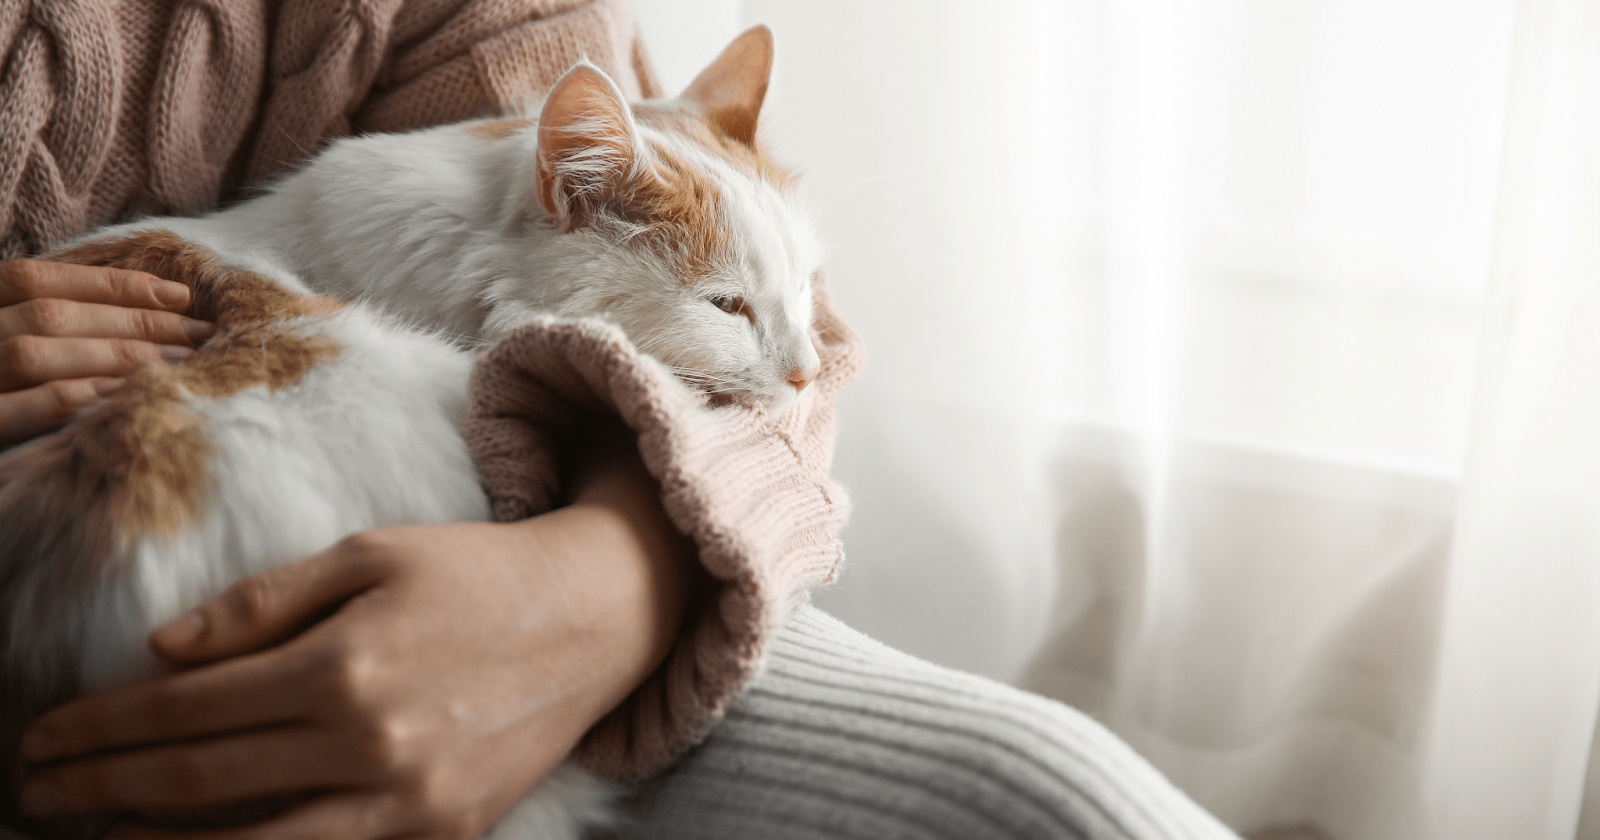 Orange and white cat curled up on owners lap beside window